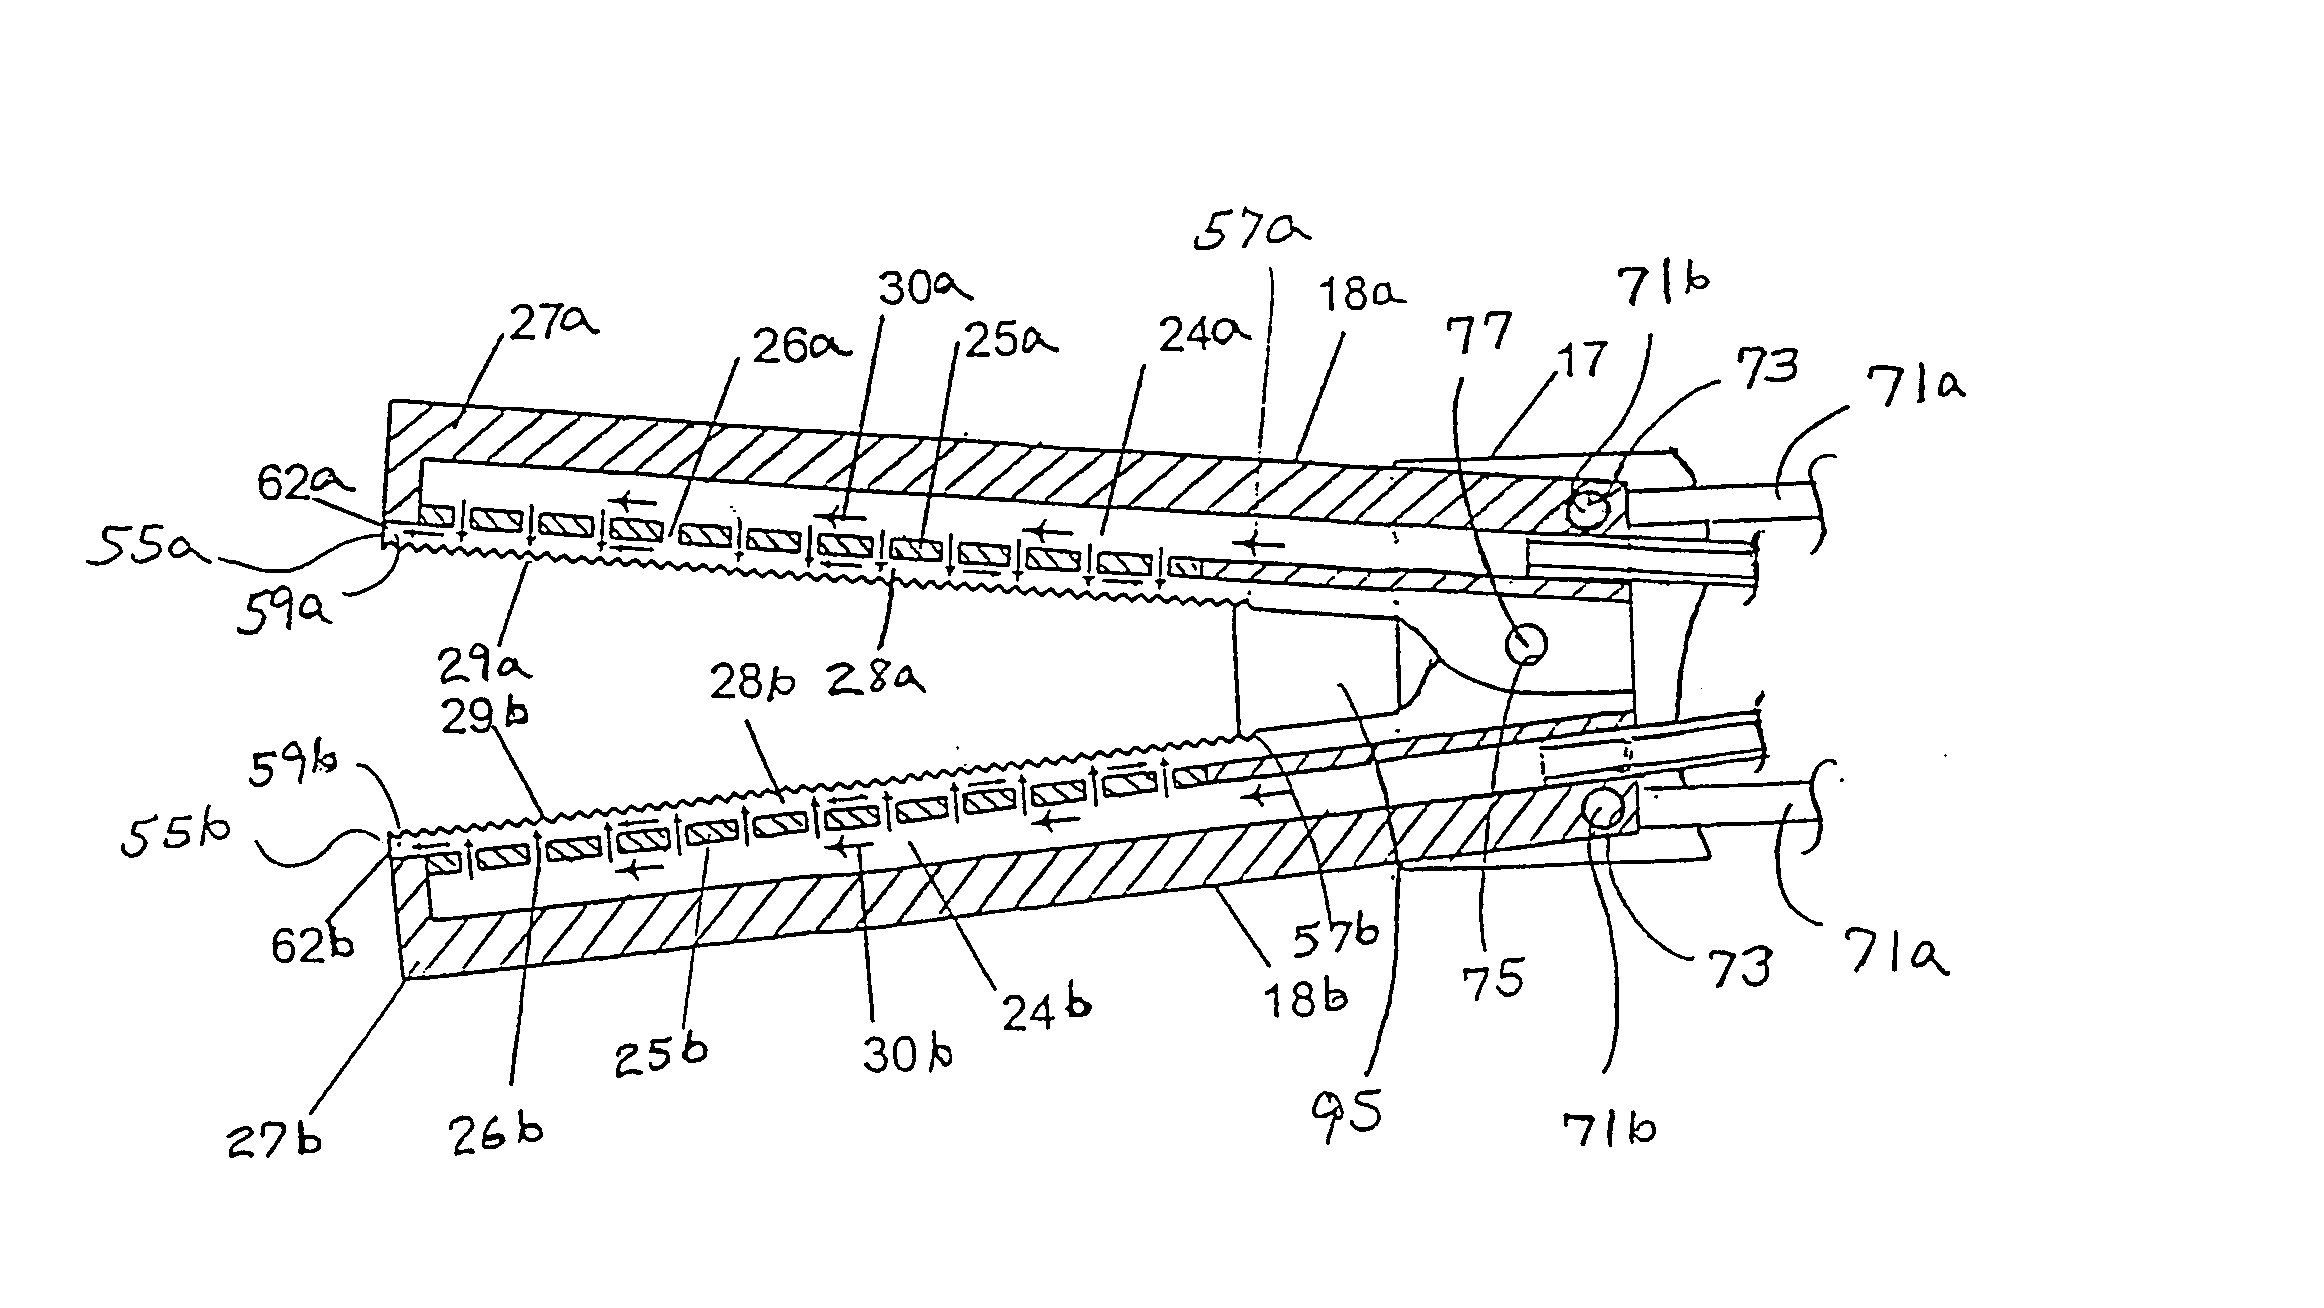 Fluid assisted medical devices, fluid delivery systems and controllers for such devices, and methods